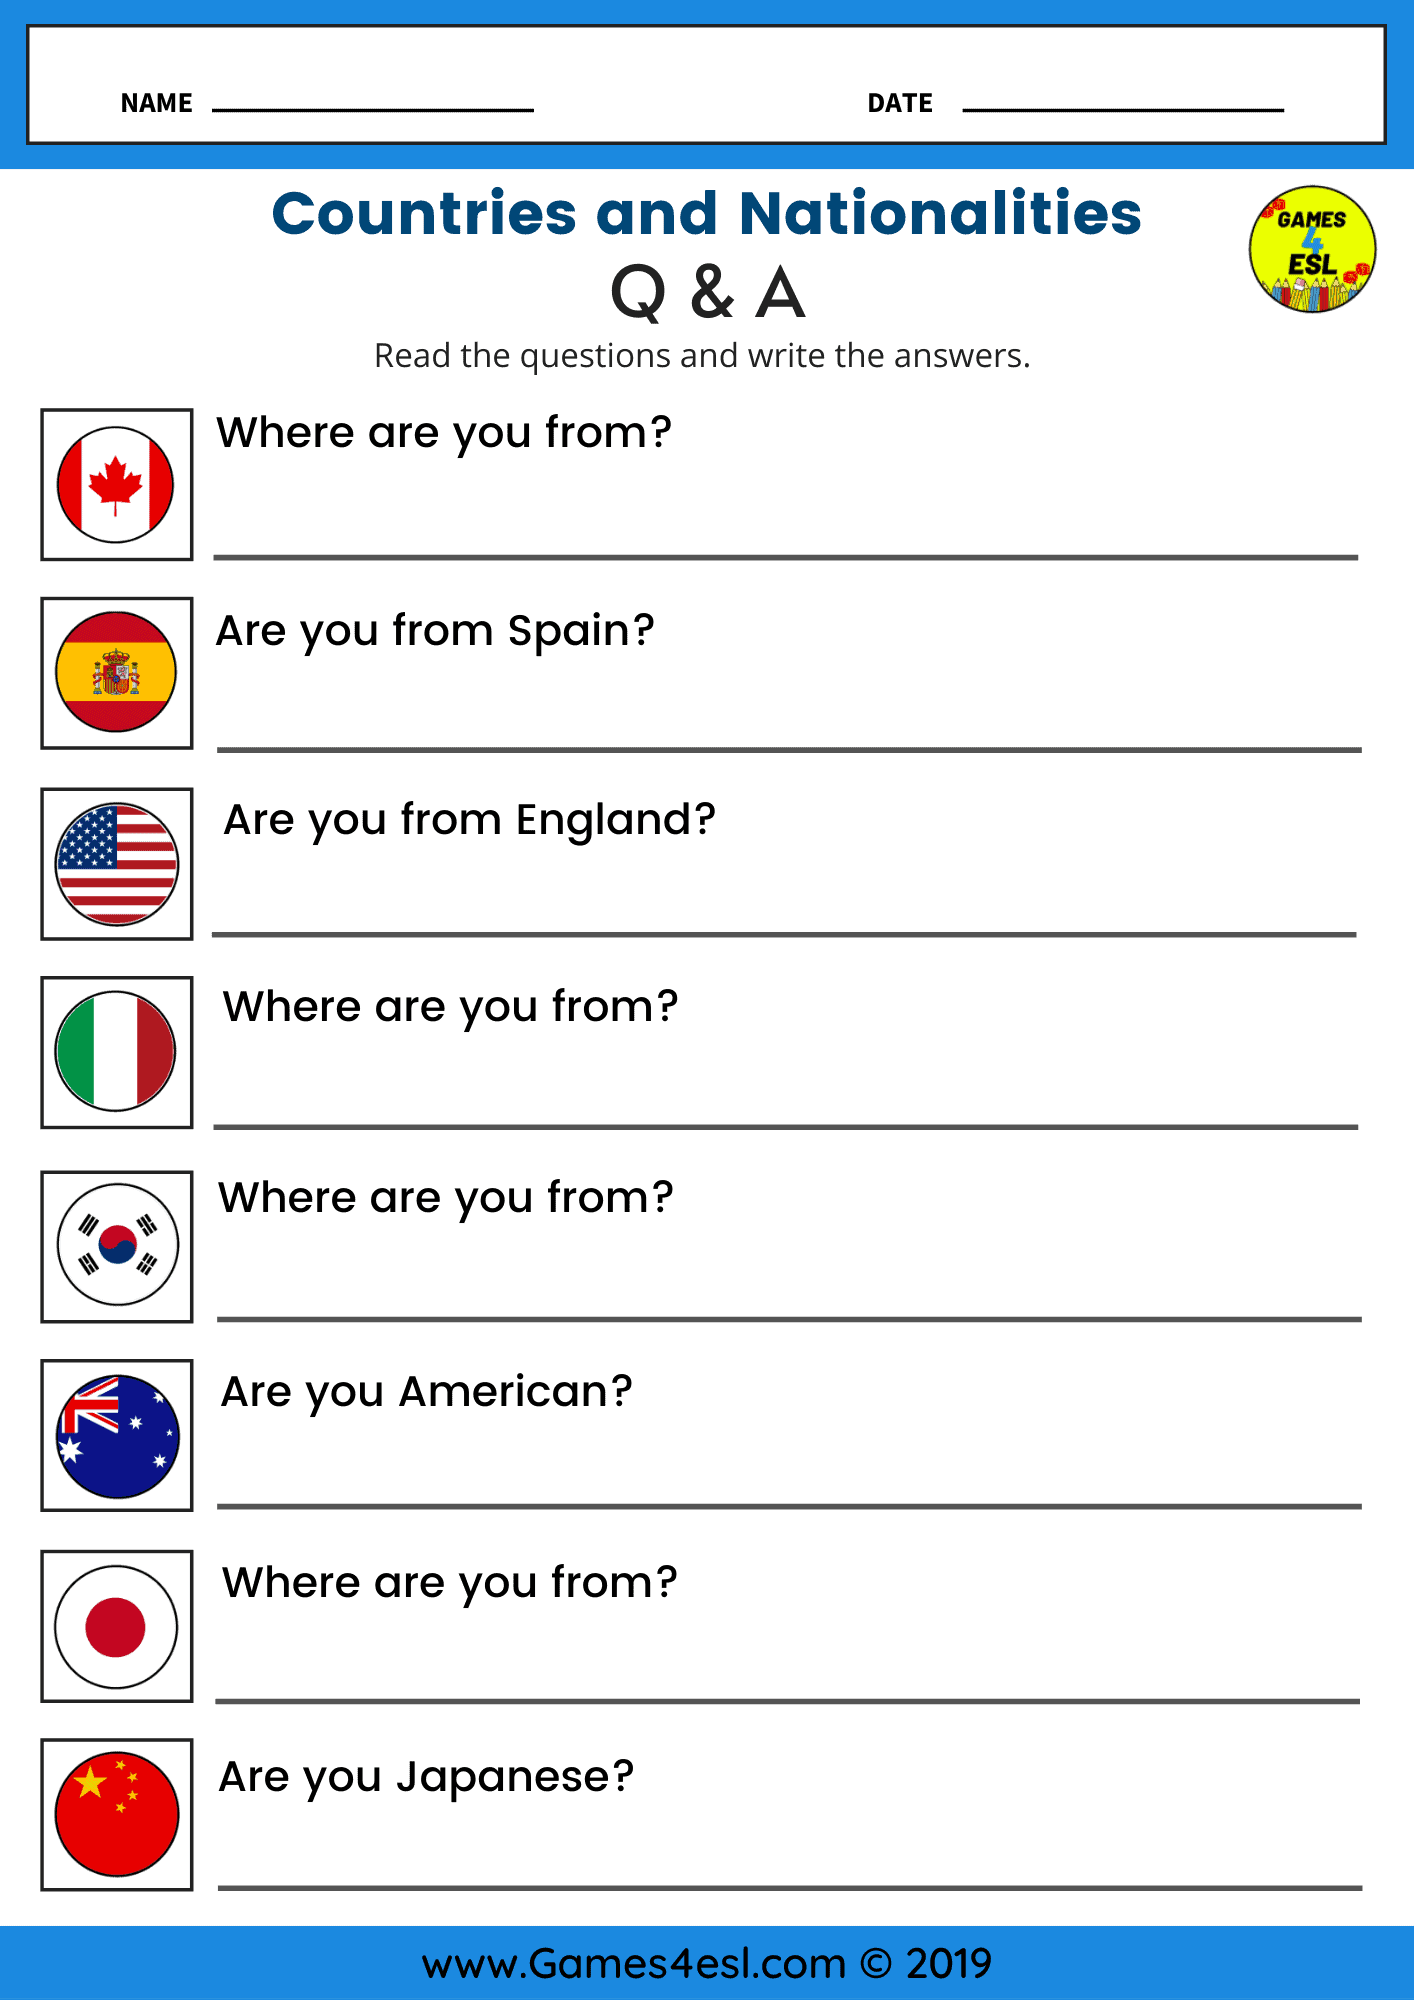 countries and nationalities worksheets games4esl